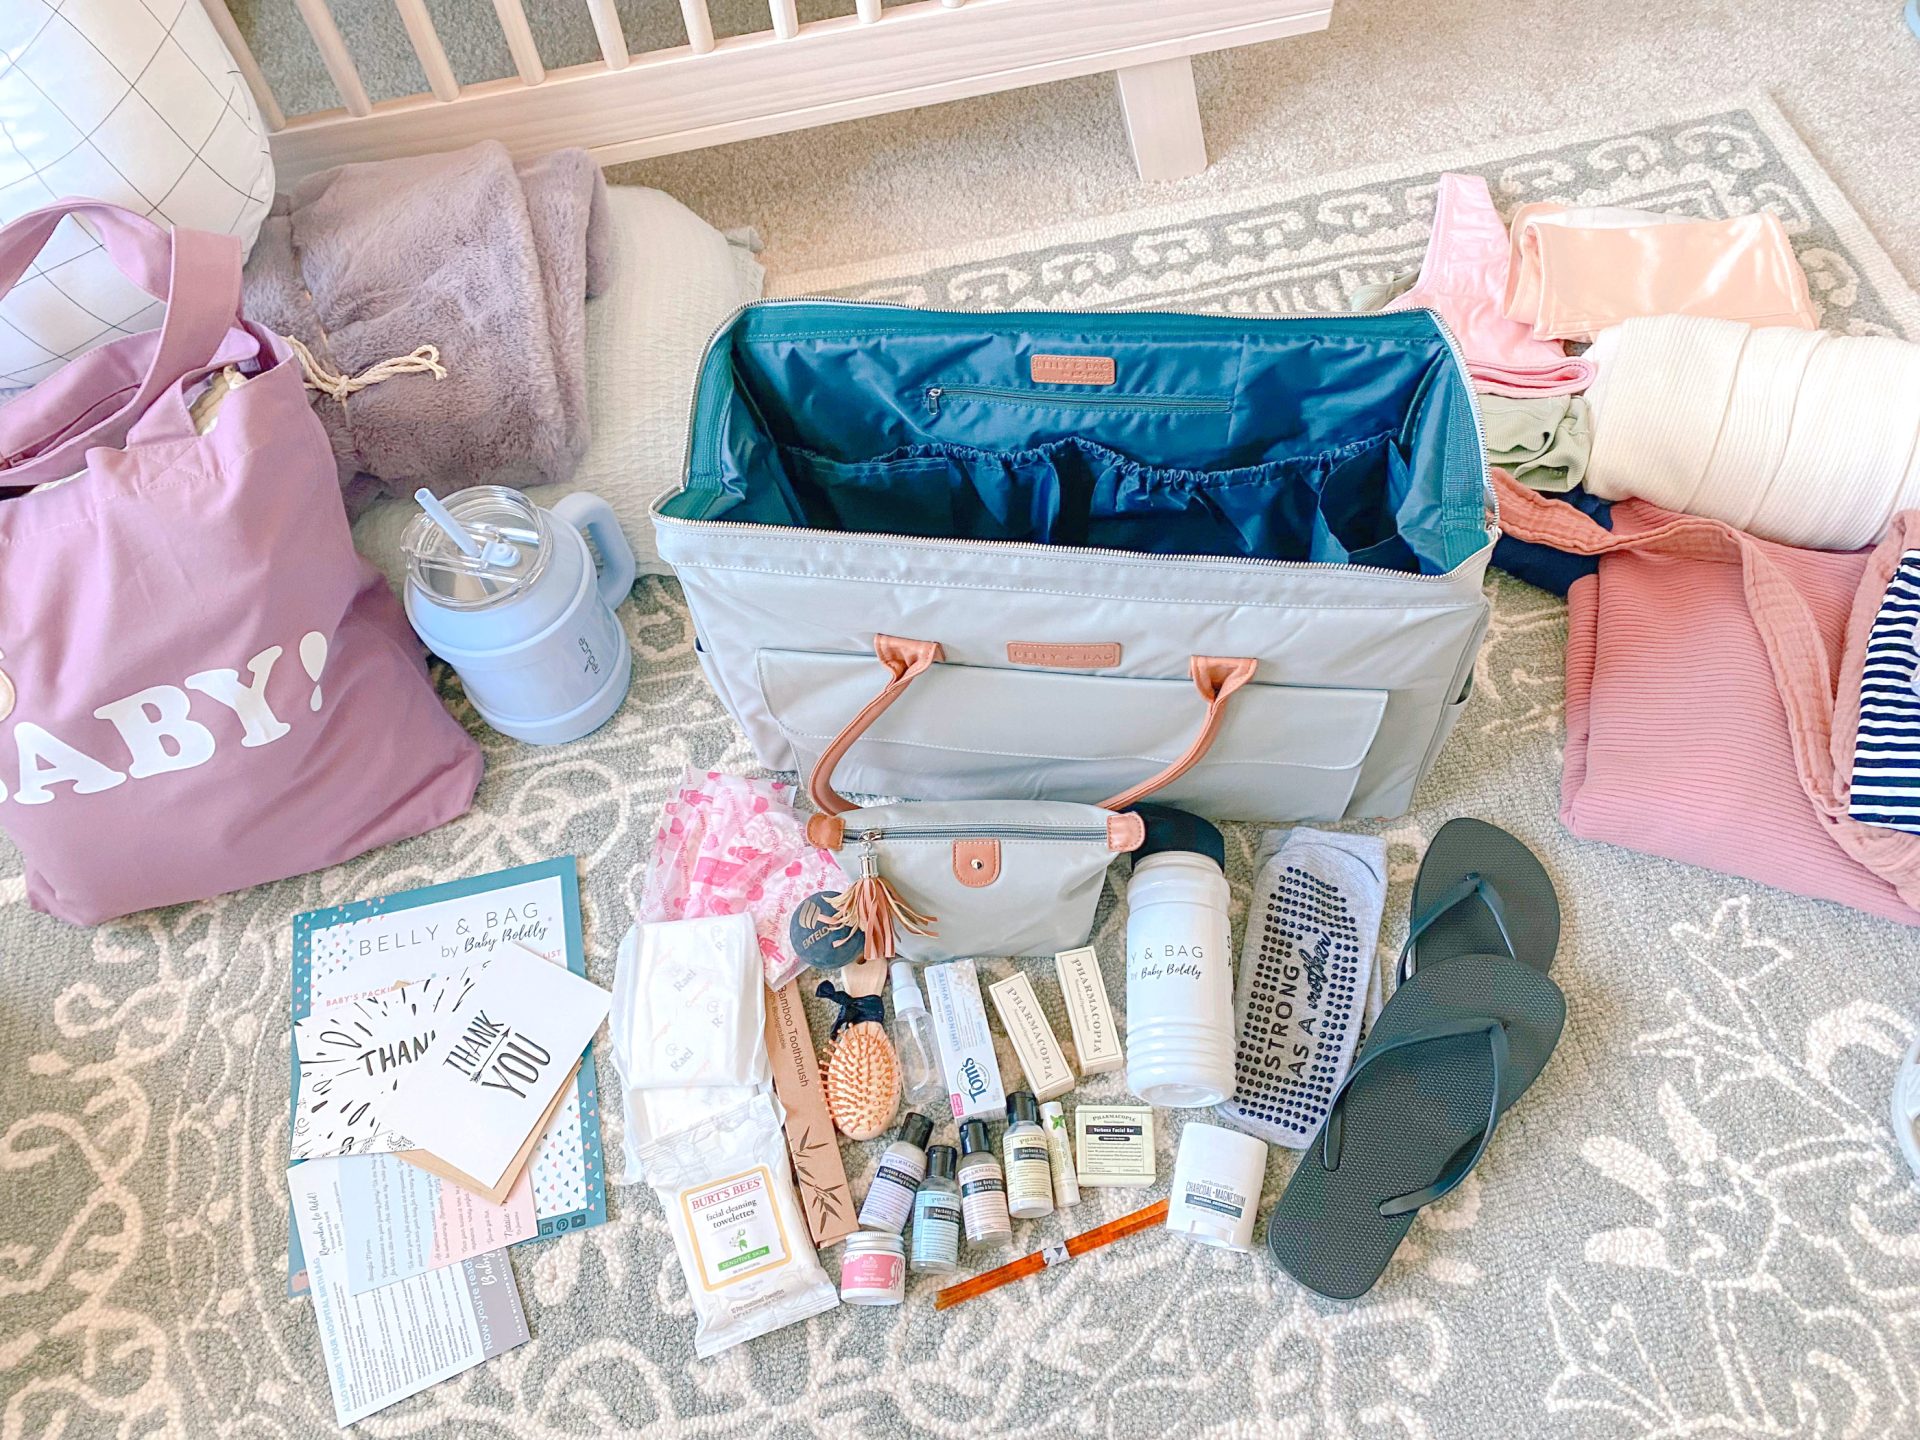 what to pack in your hospital bag for a c-section — A Mom Explores  Family  Travel Tips, Destination Guides with Kids, Family Vacation Ideas, and more!